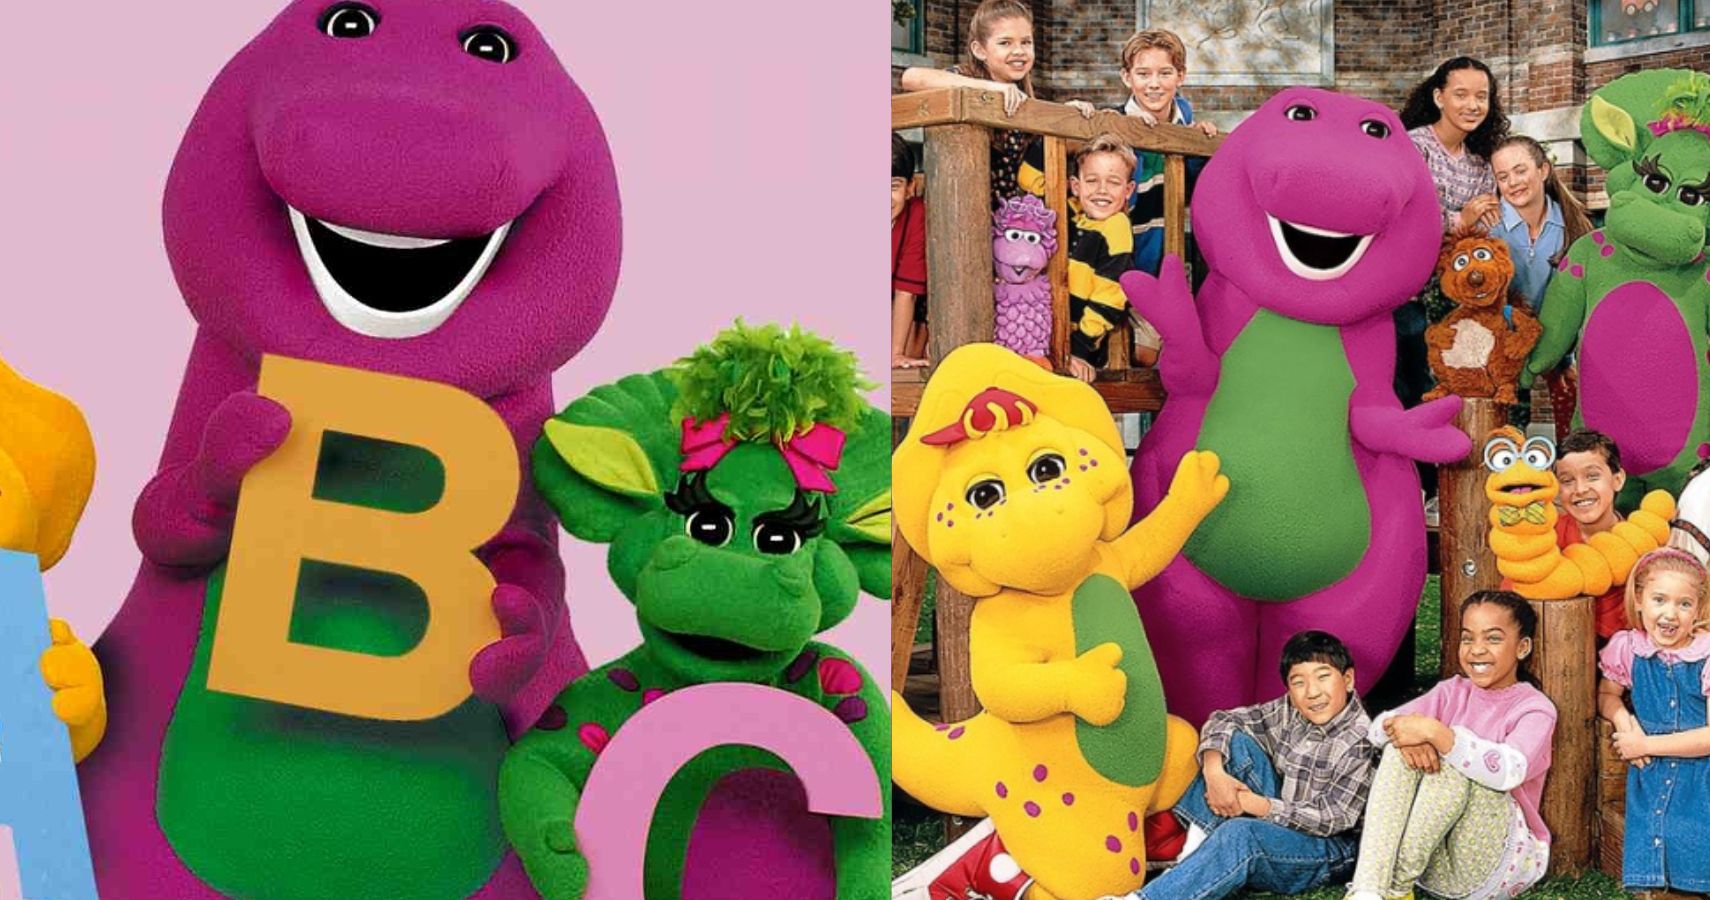 Barney: 5 Best Lessons He Tried To Teach Us As Kids (& 5 Worst)